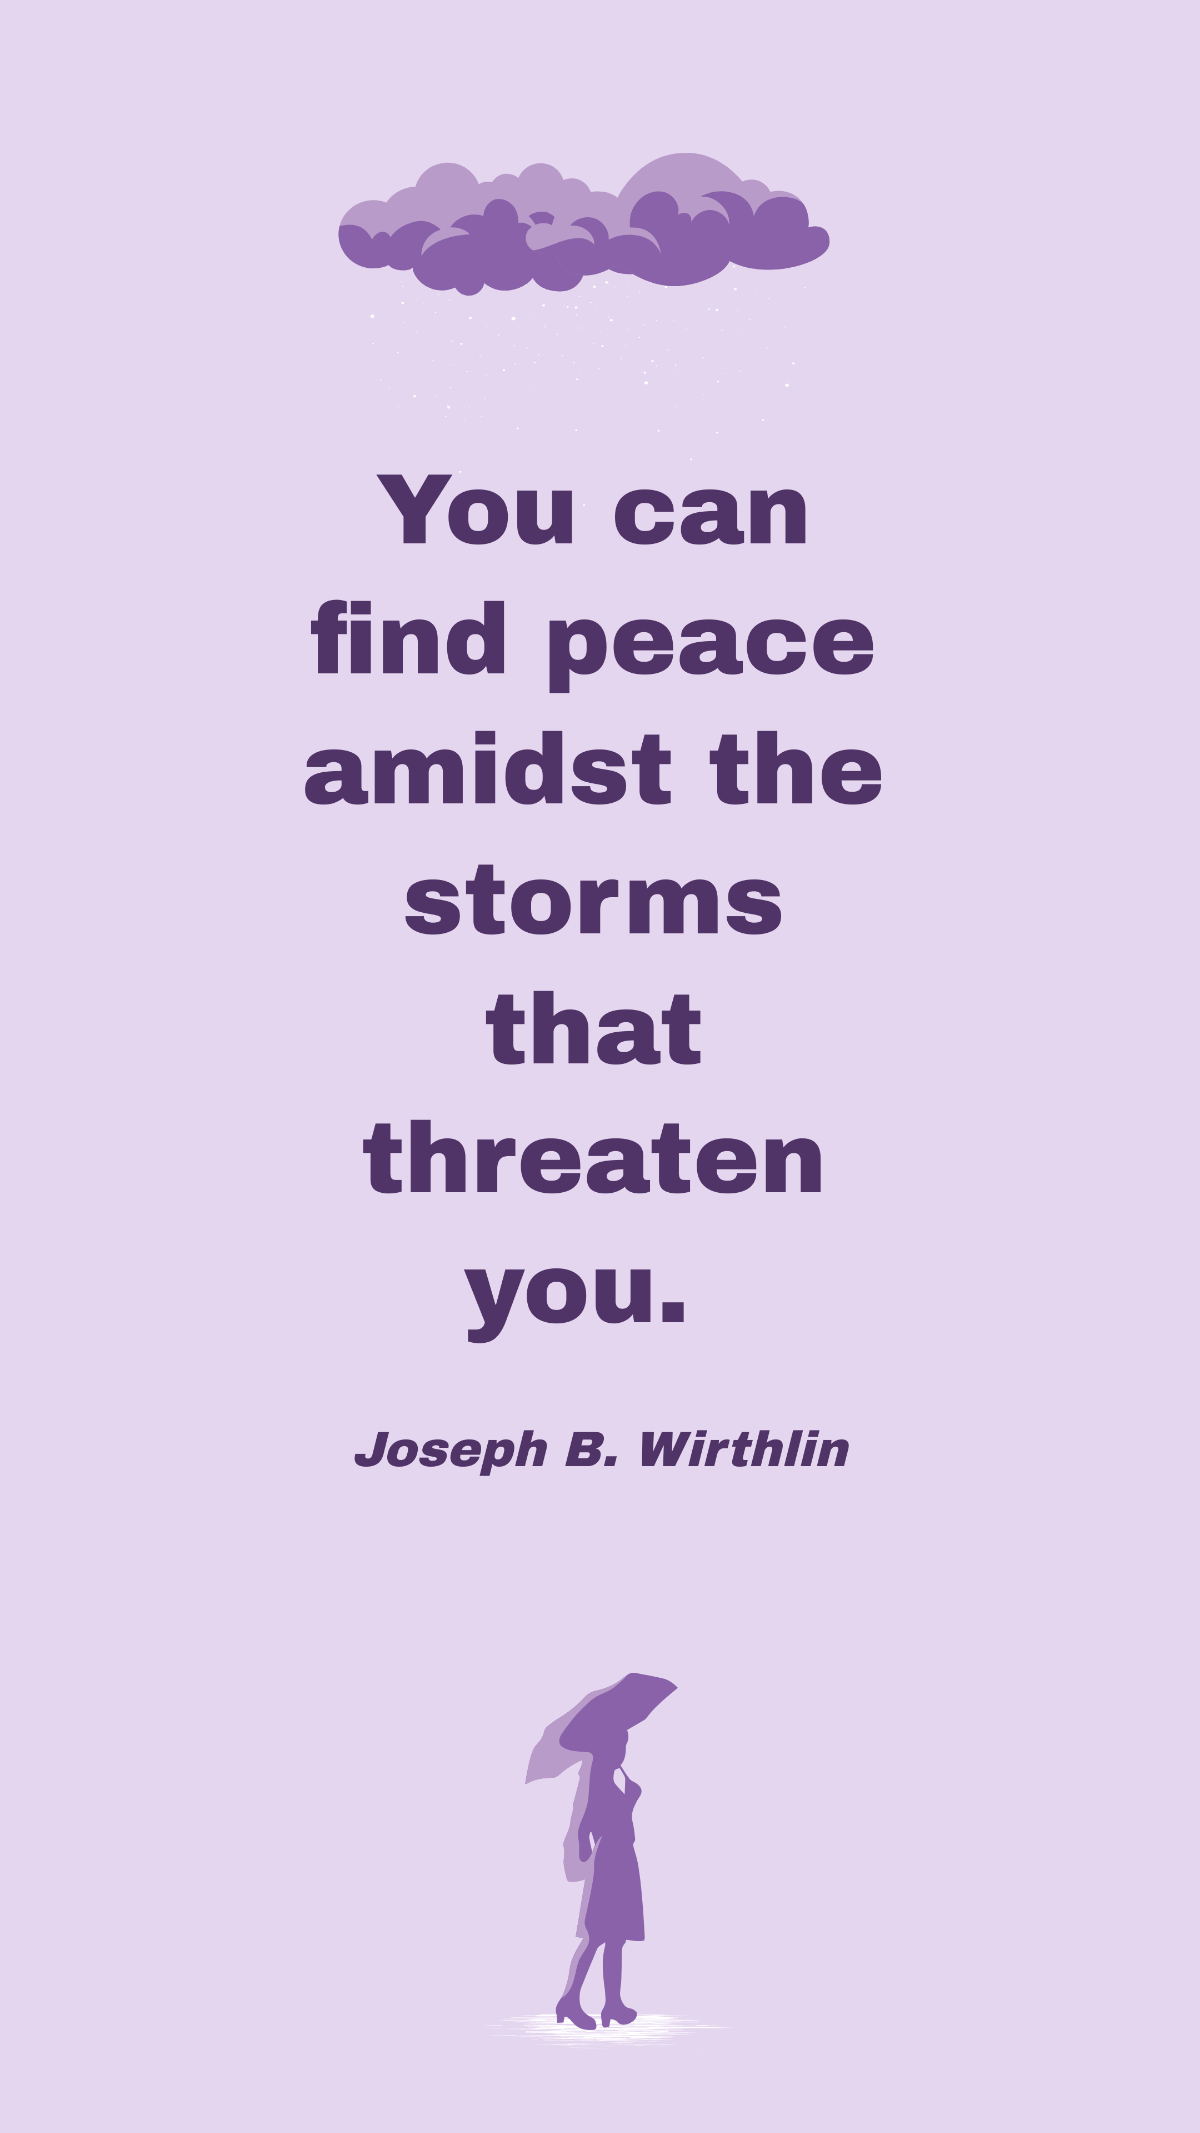 Joseph B. Wirthlin - You can find peace amidst the storms that threaten you.